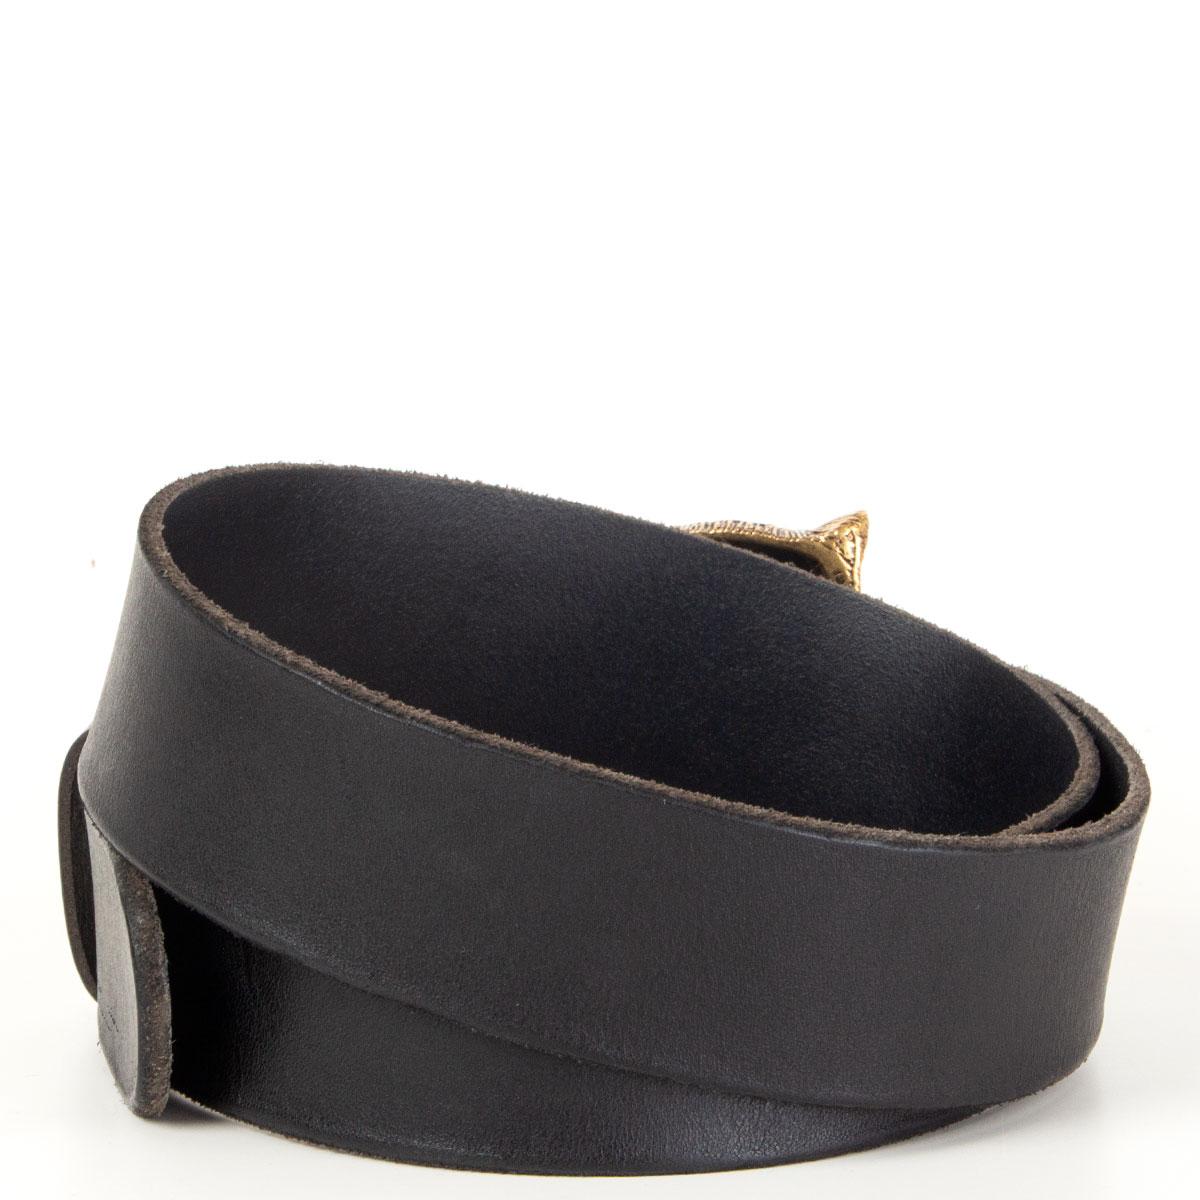 Gucci black leather belt with antique gold-tone tiger head buckle. Has been worn and is in excellent condition. 

Tag Size 90/36
Width 4cm (1.6in)
Fits 85.5cm (33.3in) to 96cm (37.4in)
Length 111cm (43.3in)
Buckle Size Height 8cm (3.1in)
Buckle Size